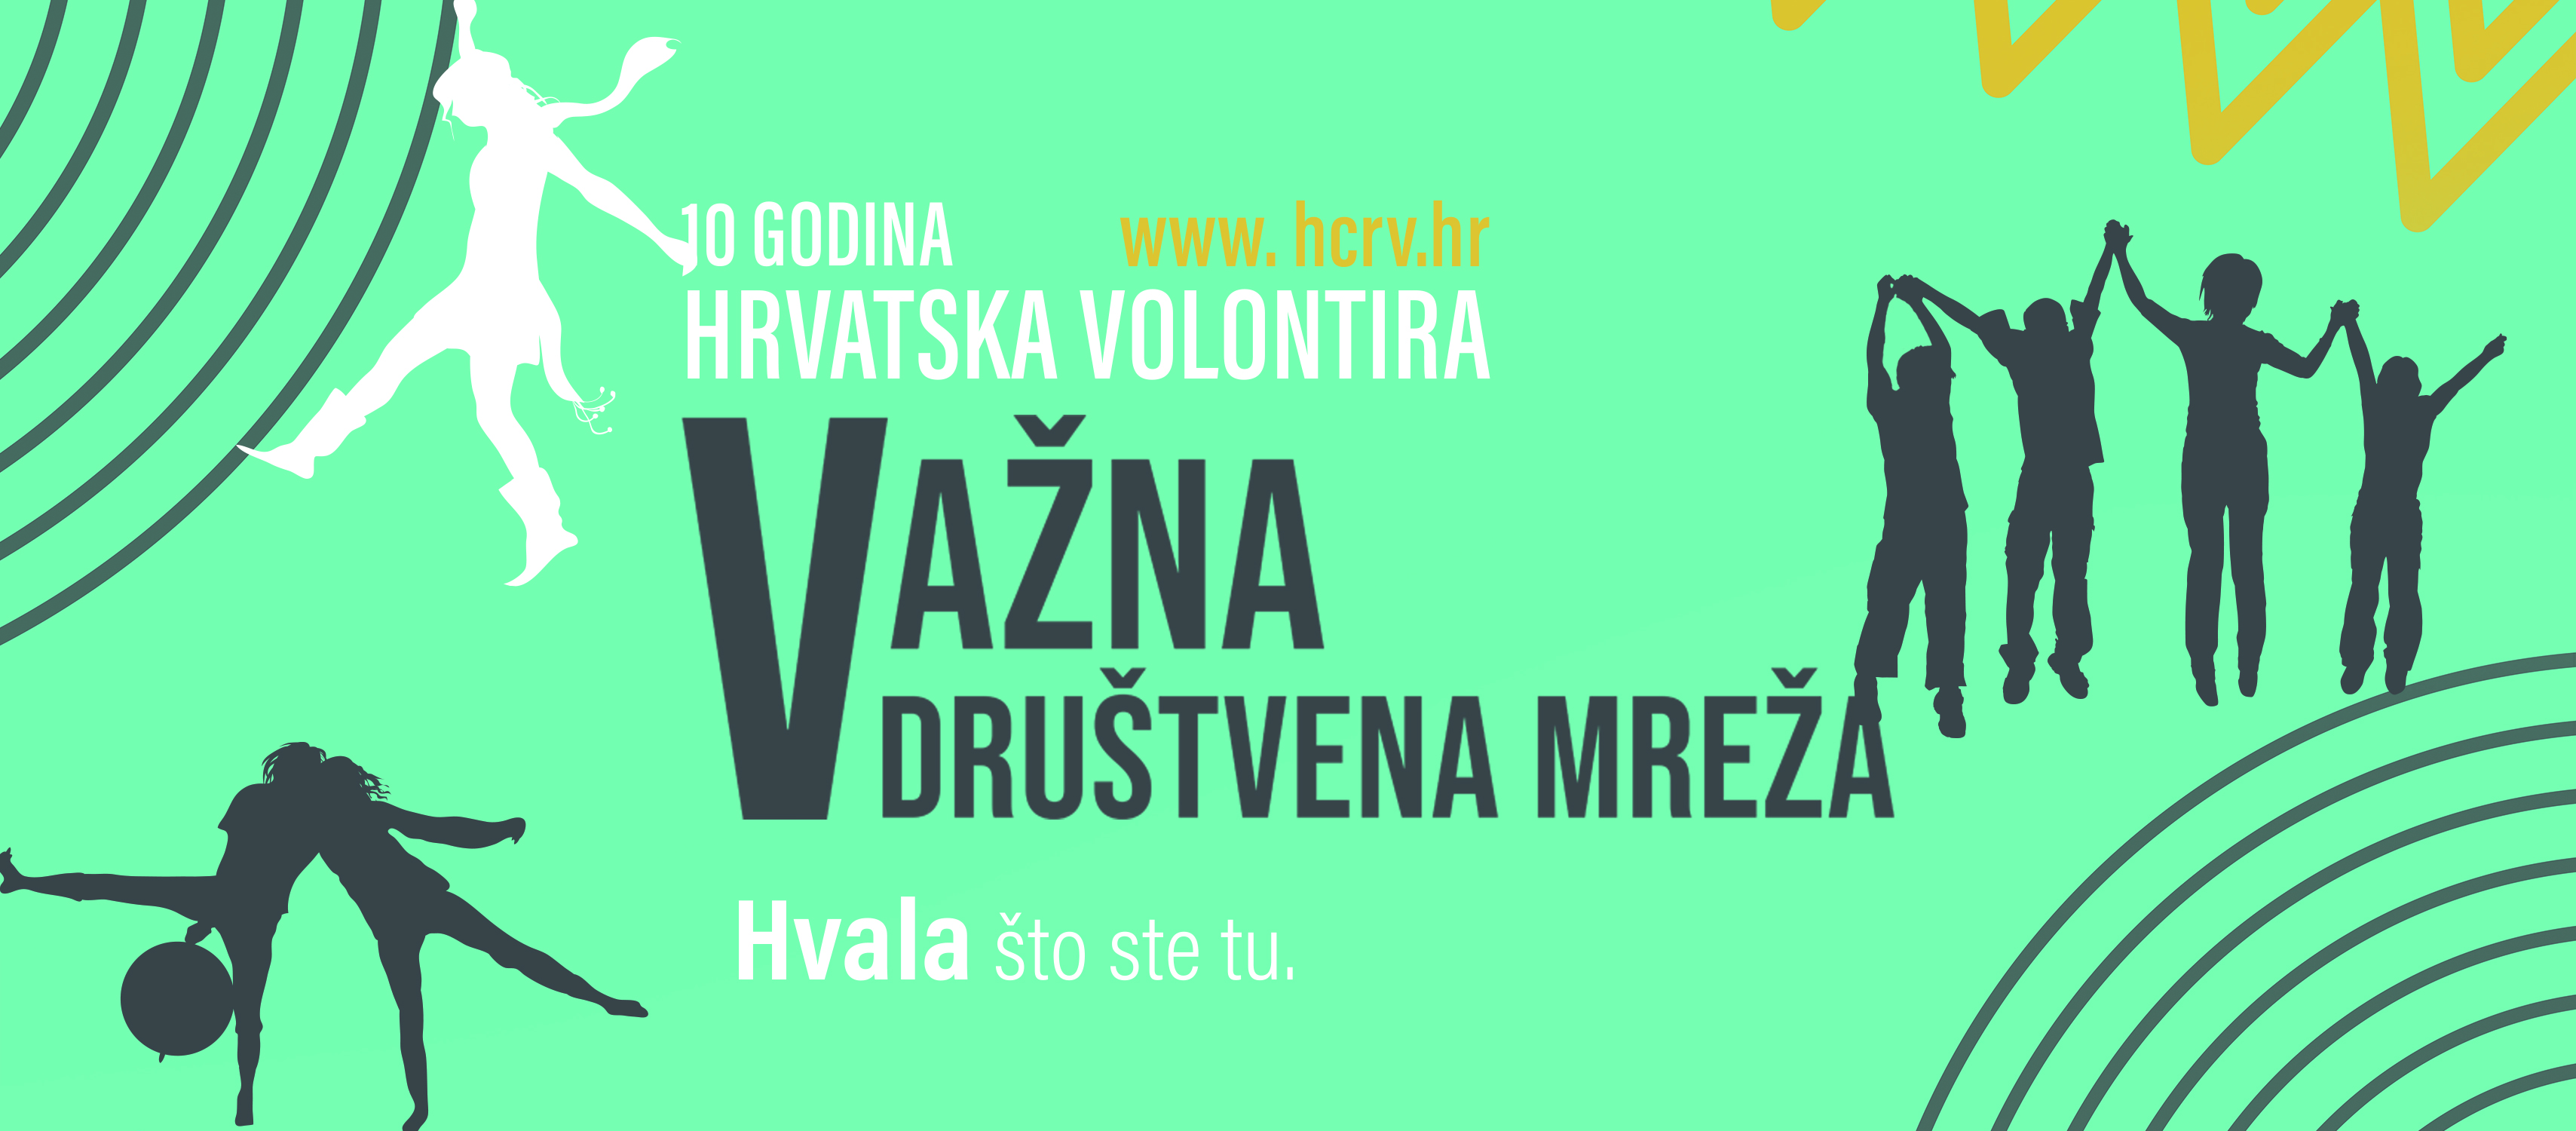 You are currently viewing Hrvatska volontira 2020